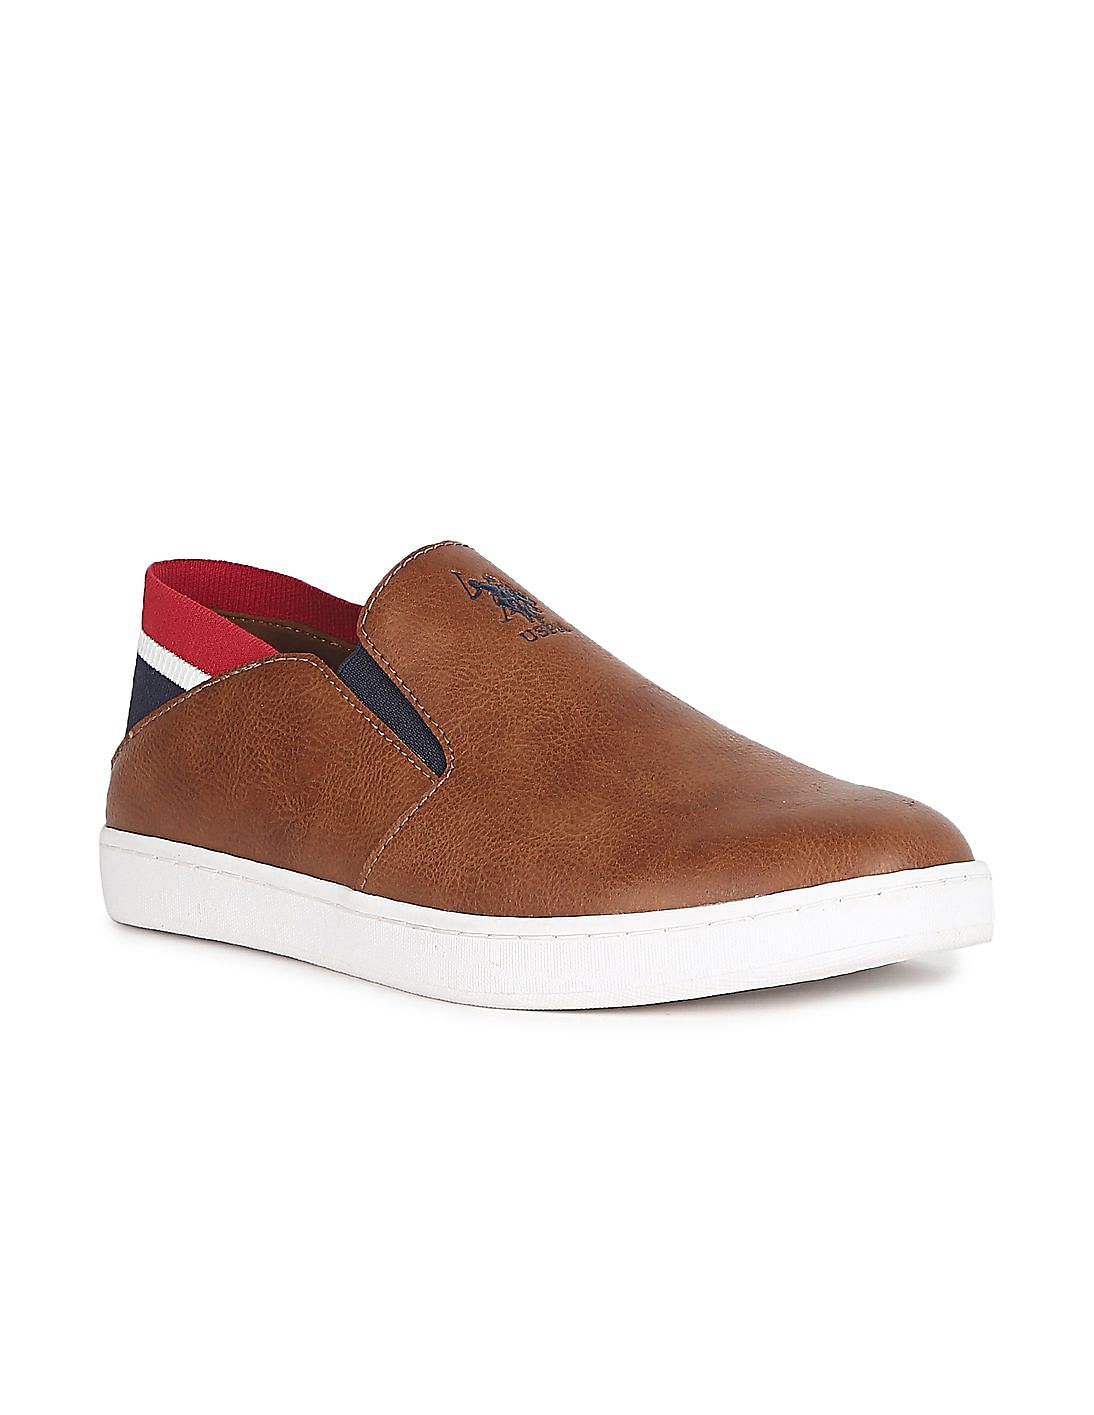 Buy U.S. Polo Assn. Round Toe Solid Quebec Slip On Shoes - NNNOW.com